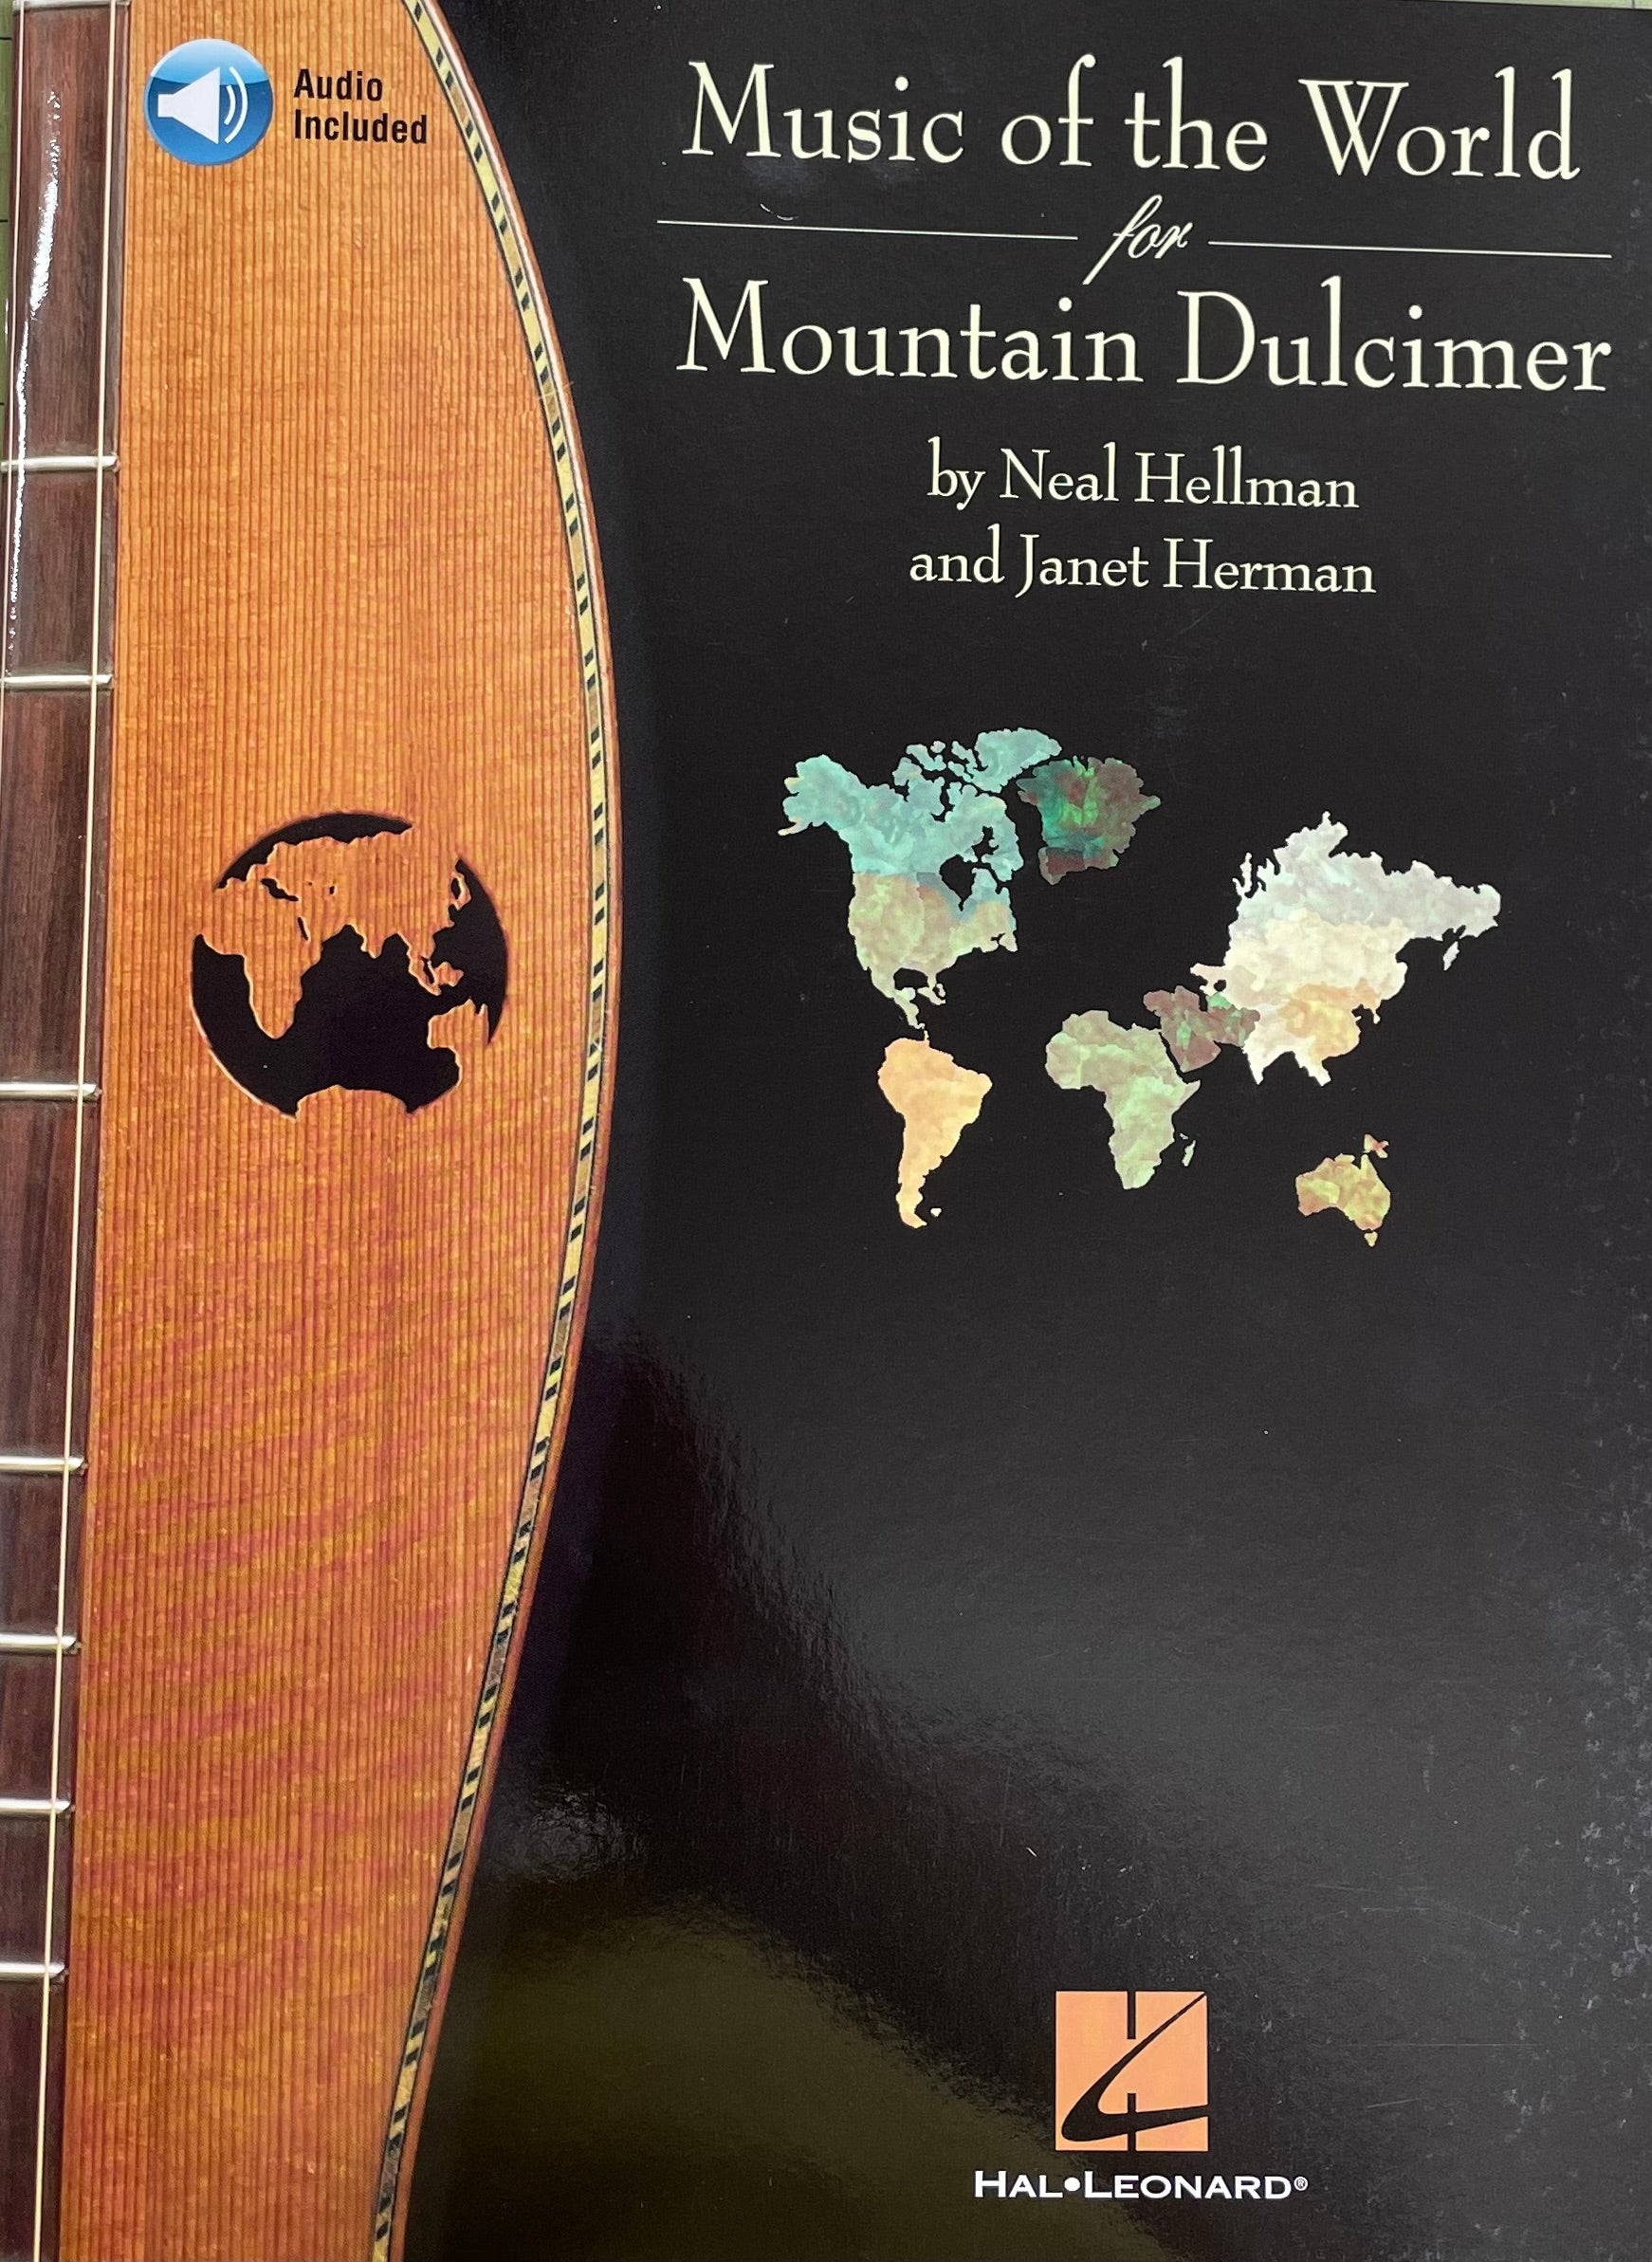 A mountain dulcimer next to "Music of the World for Mountain Dulcimer" by Neal Hellman and Janet Herman, featuring tablature and musical notation, published by Hal.